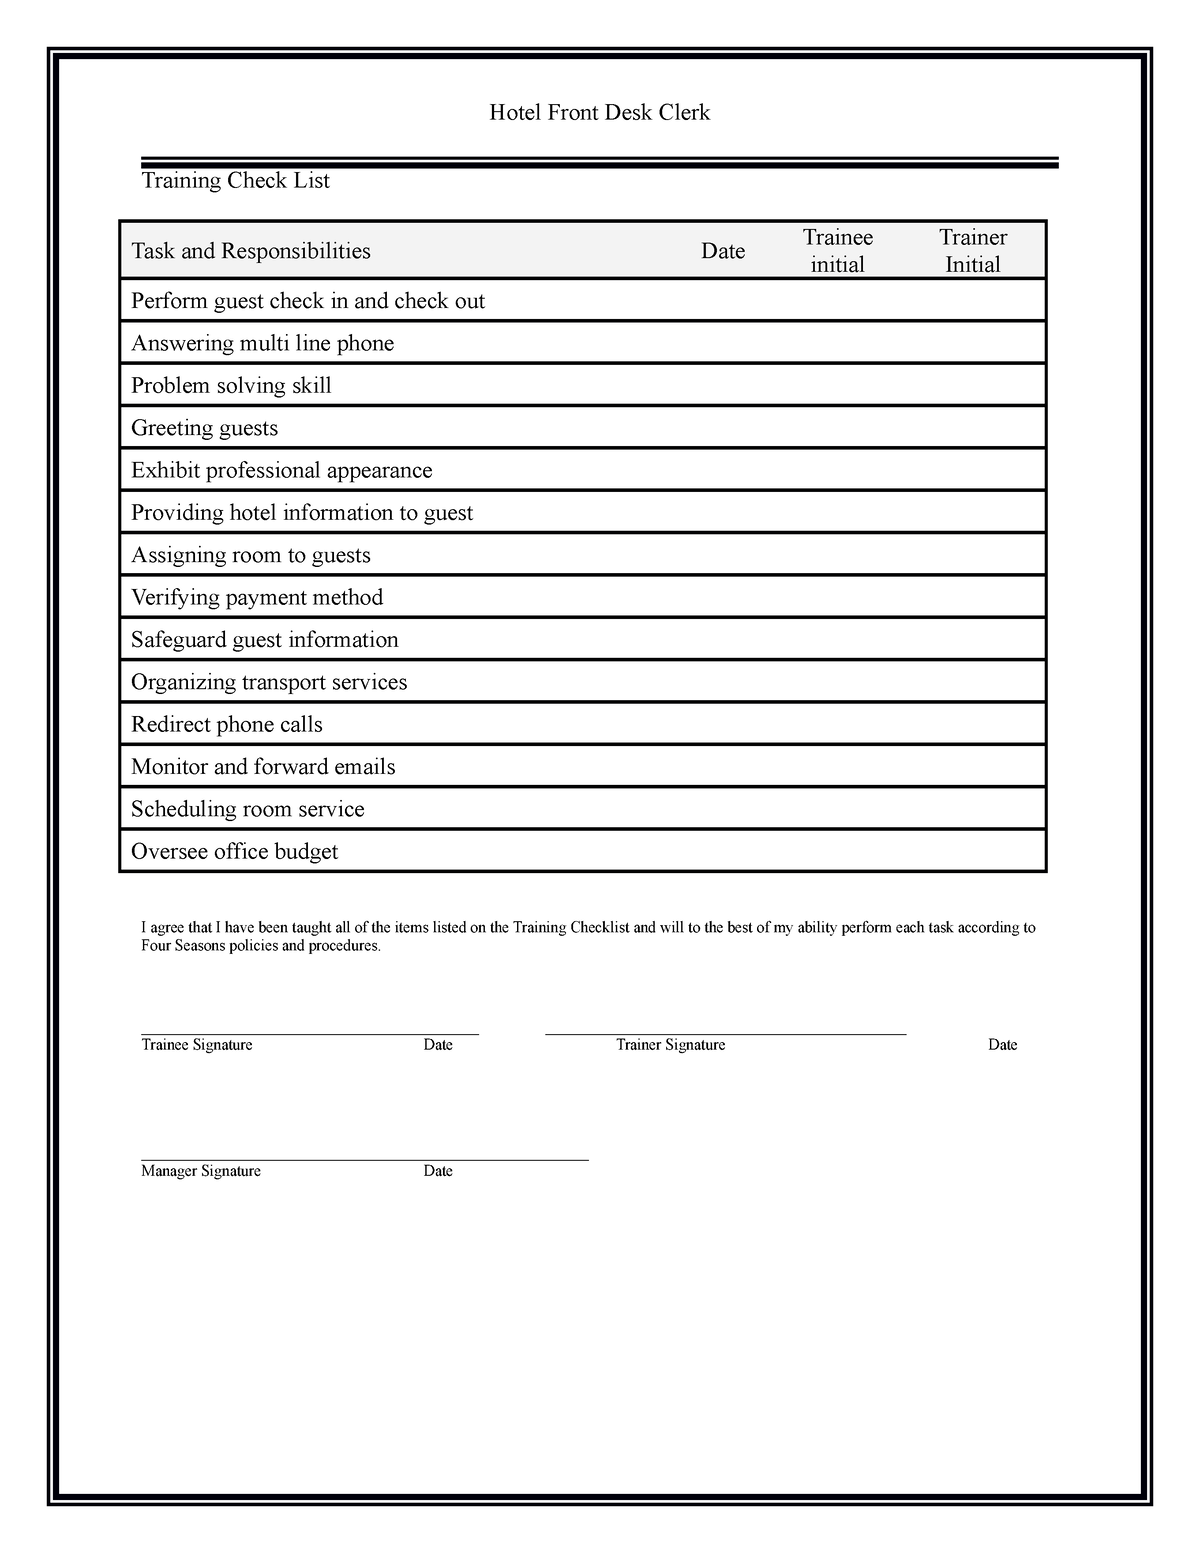 Training Checklist for music class course Hotel Front Desk Clerk